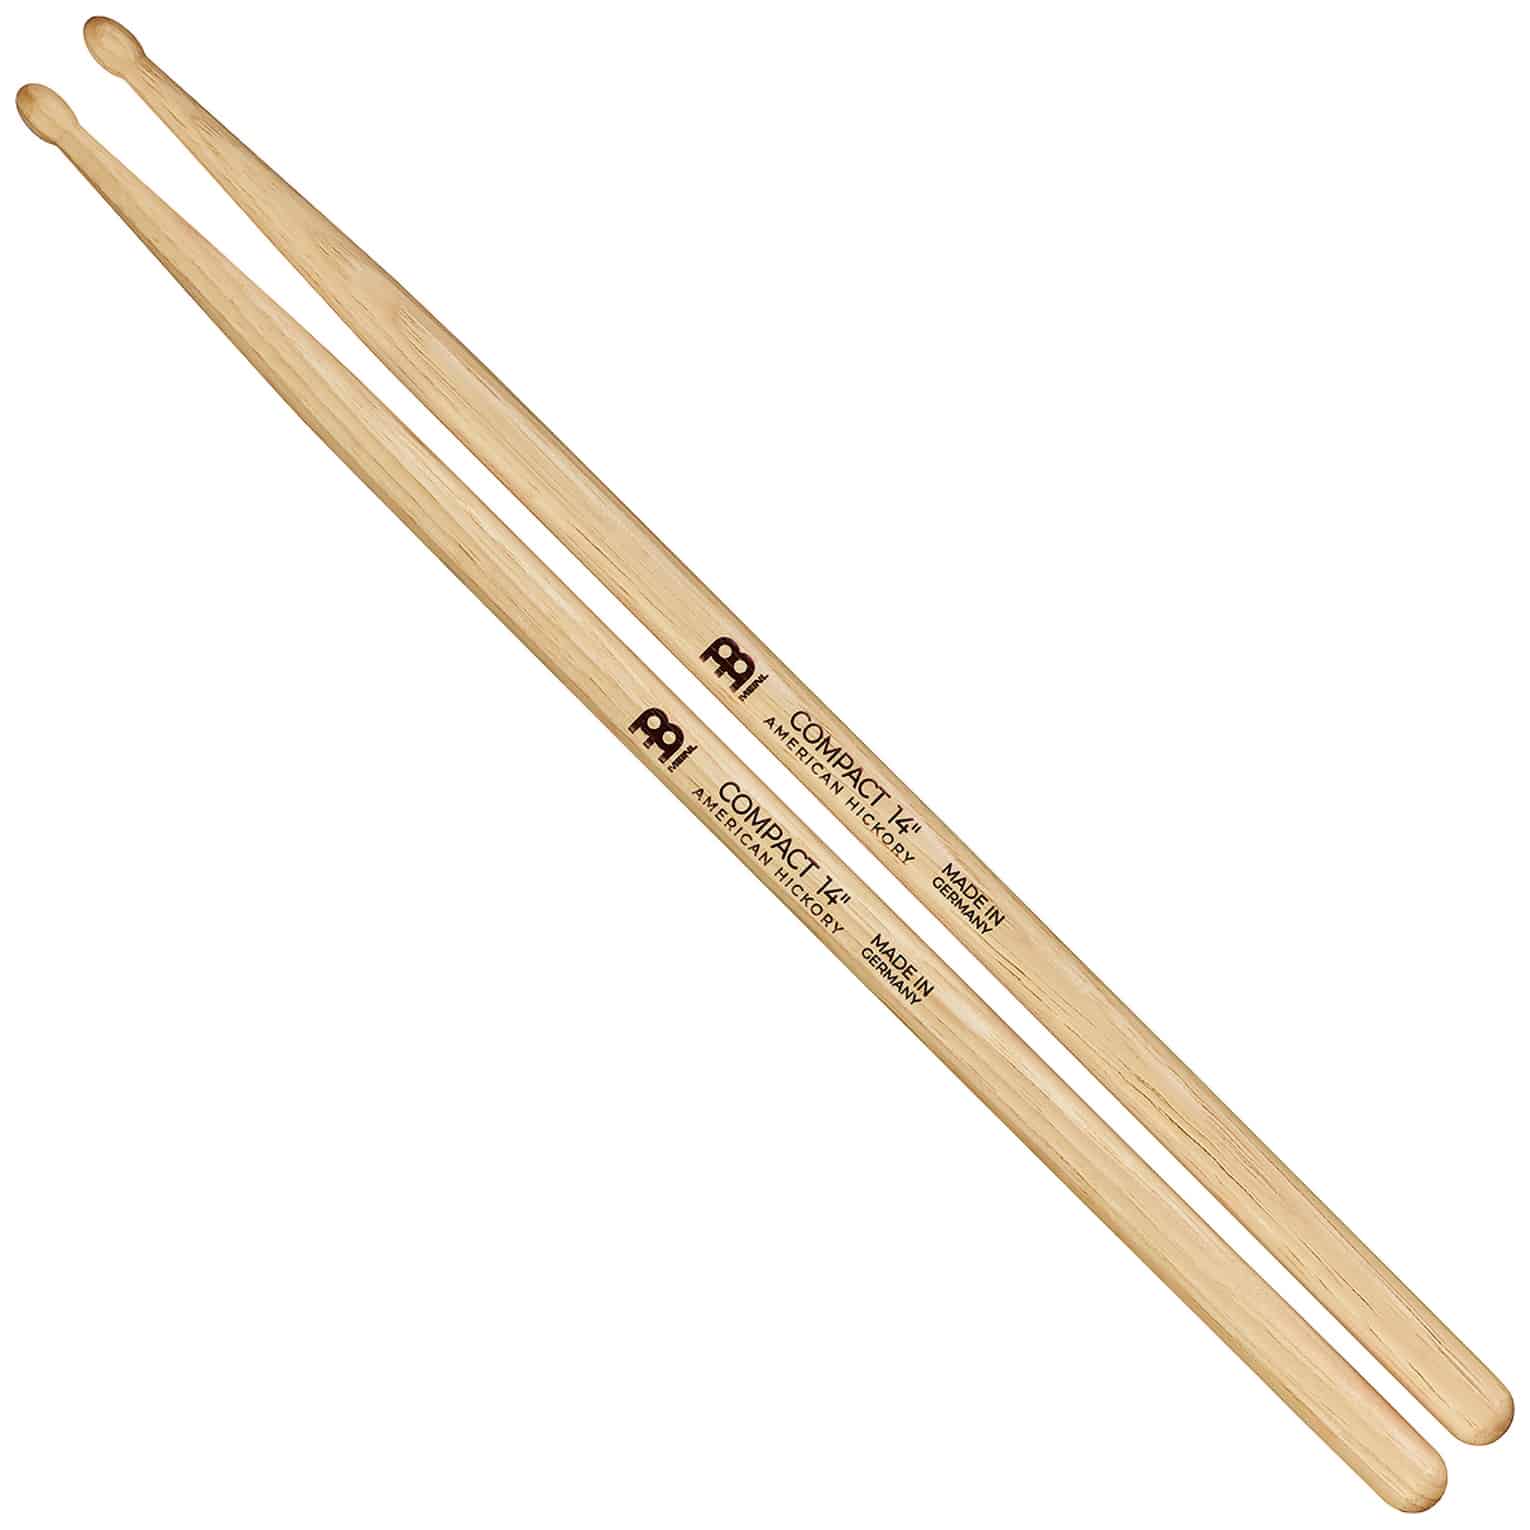 Meinl Stick & Brush Compact 14" Drumstick American Hickory